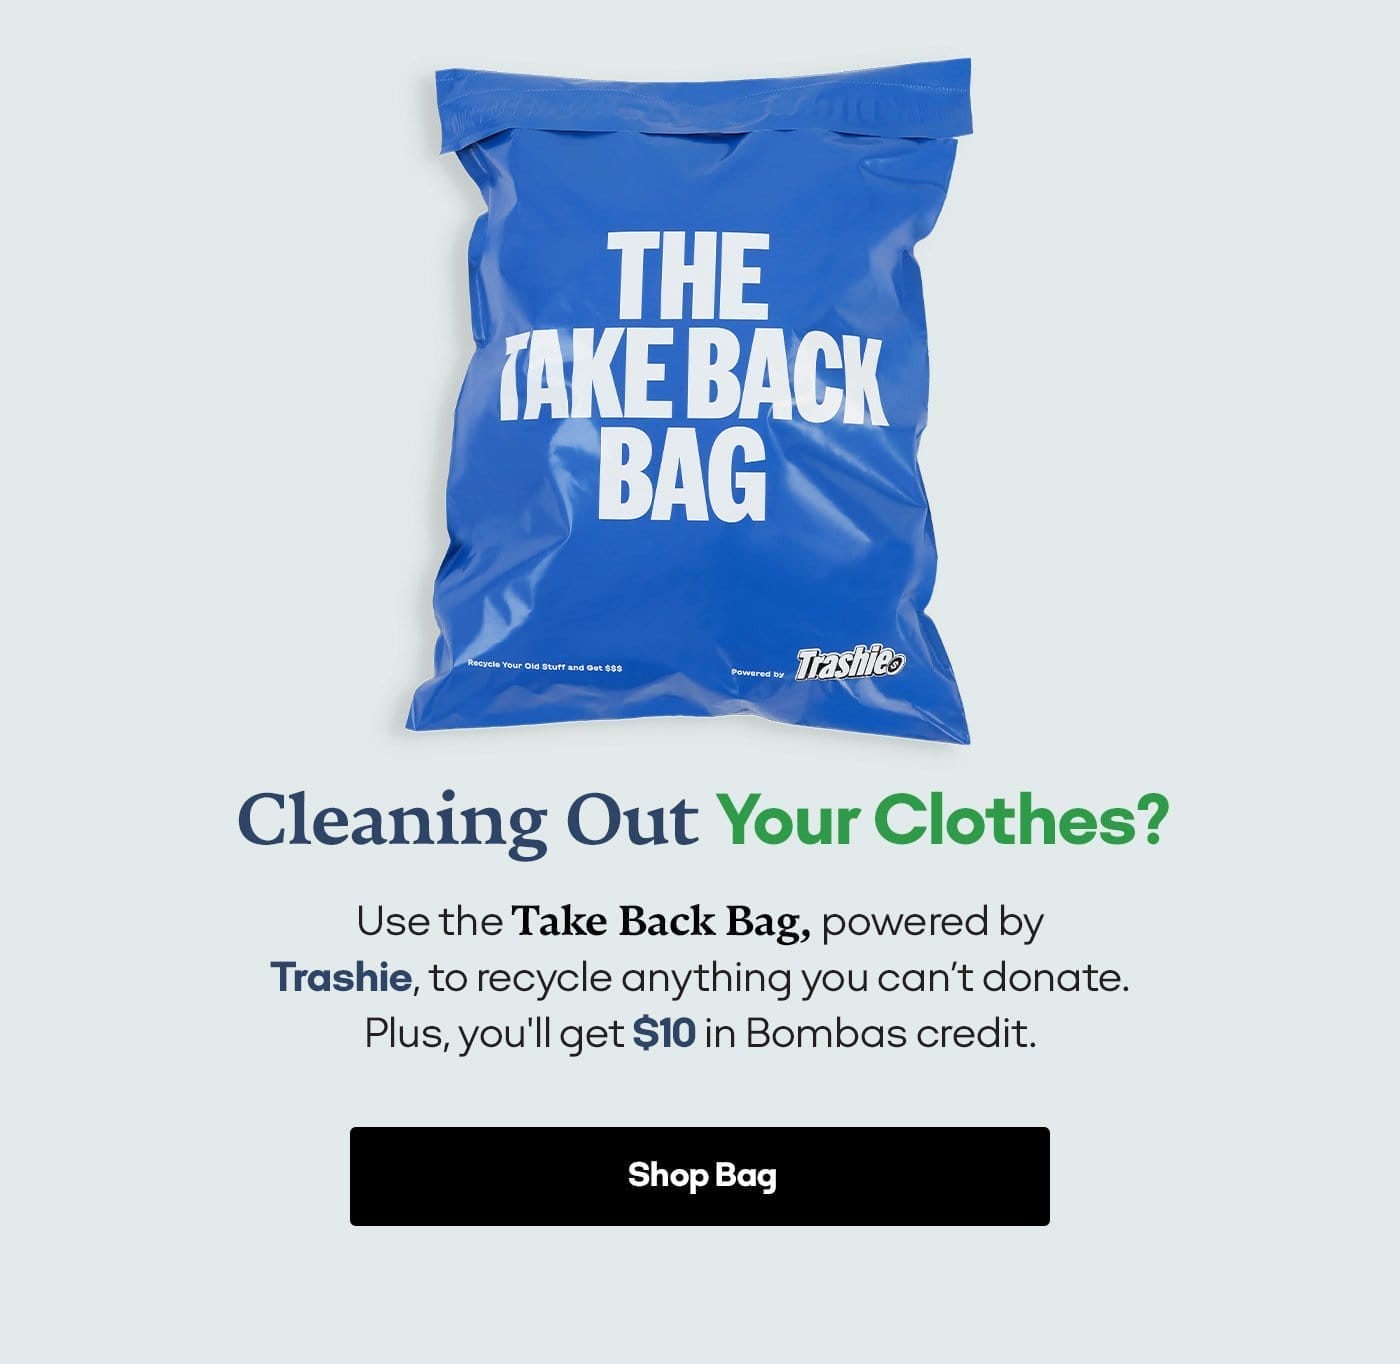 CLEANING OUT YOUR CLOTHES? | USE THE TAKE BACK BAG, POWERED BY TRASHIE, TO RECYCLE ANYTHING YOU CAN'T DONATE. PLUS, YOU'LL GET \\$10 IN BOMBAS CREDIT. | SHOP BAG 